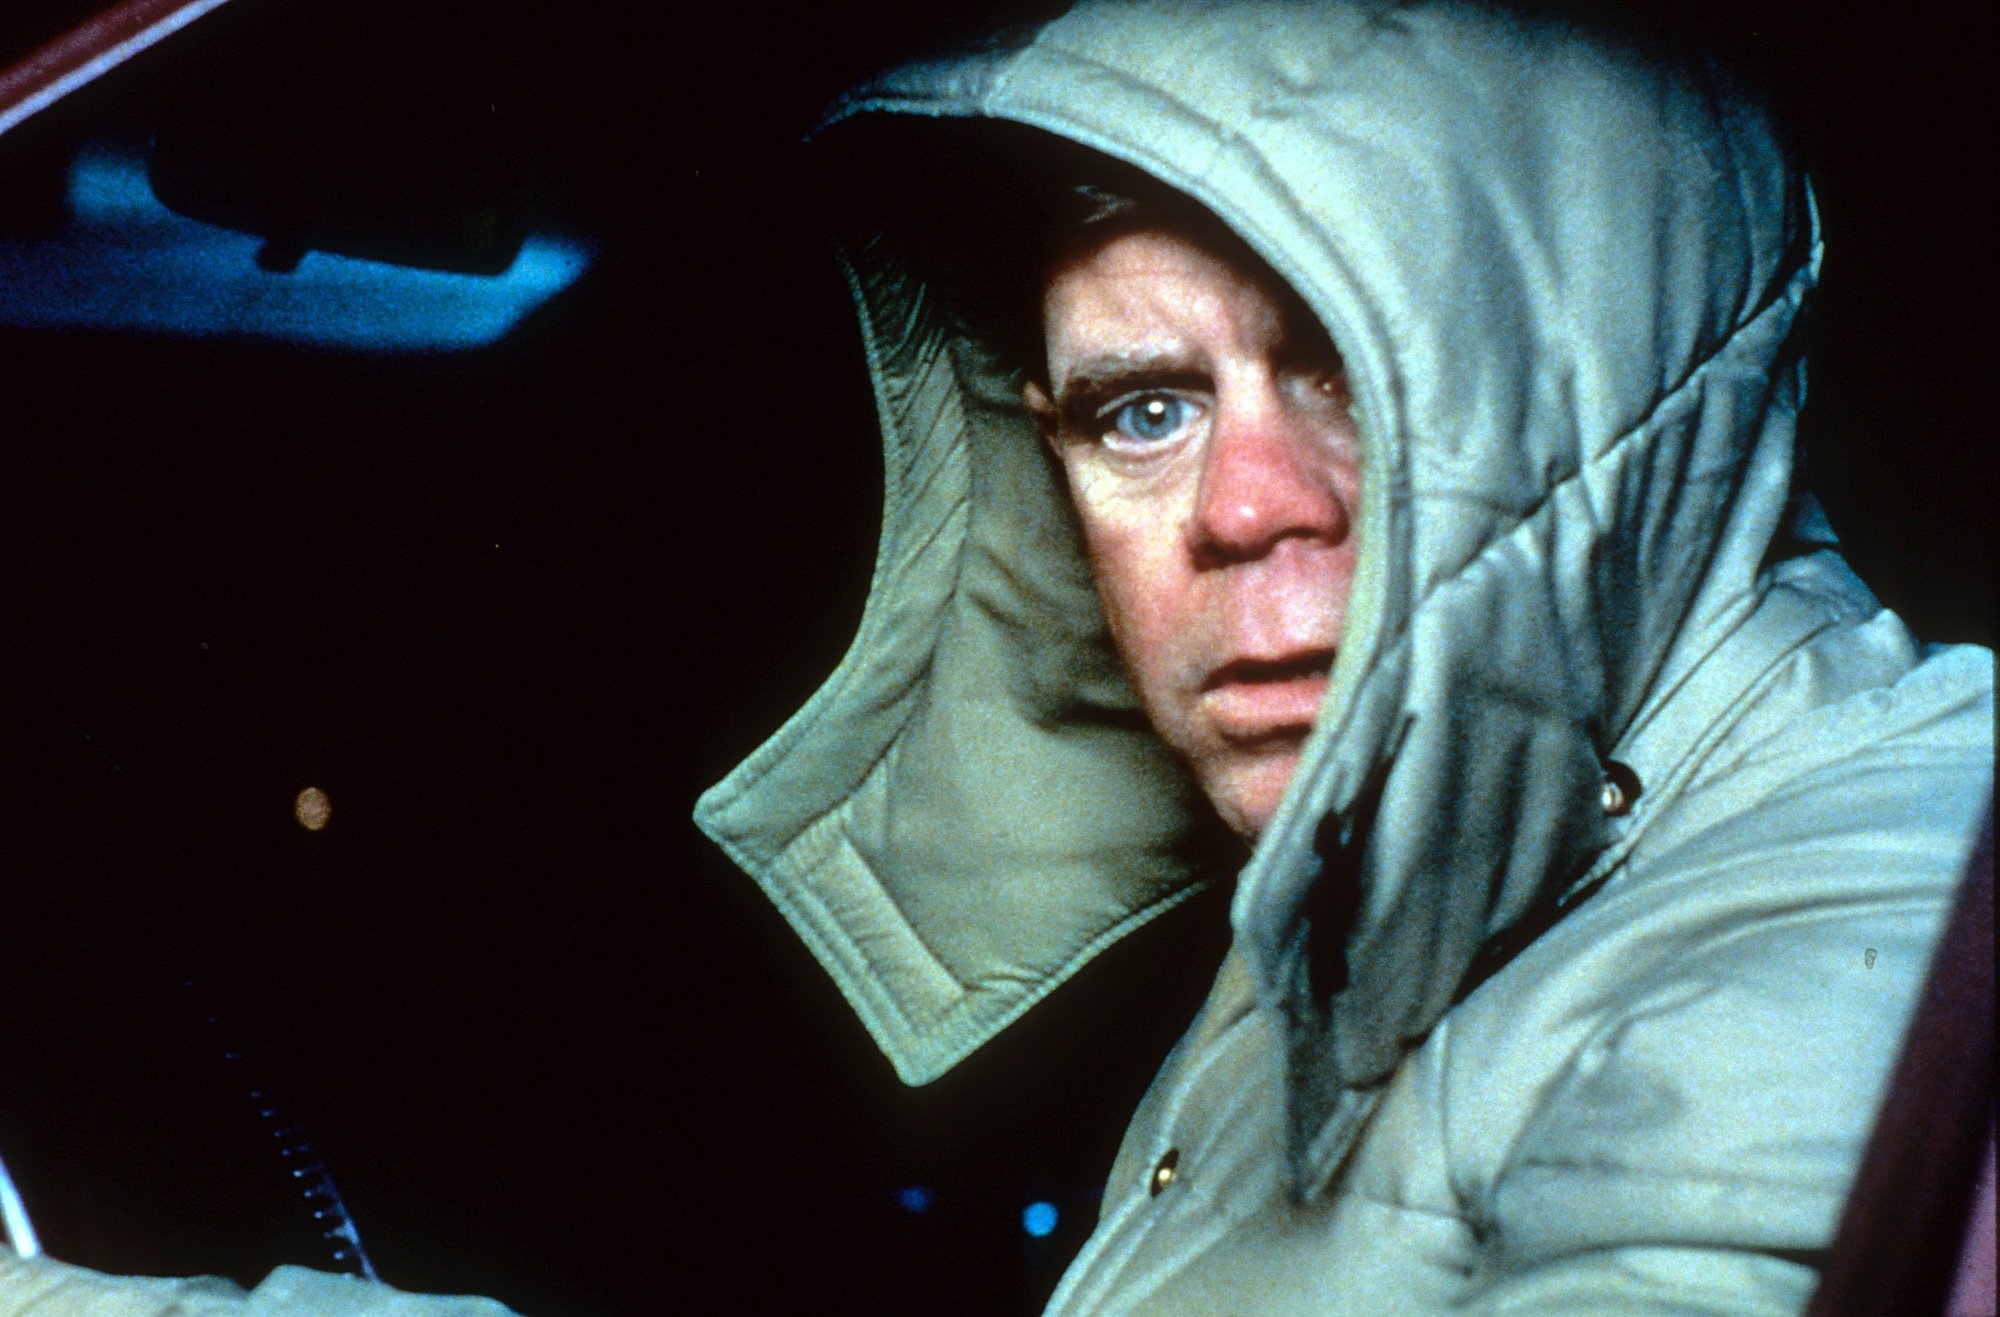 'Fargo' William H. Macy as Jerry Lundegaard with a hood on